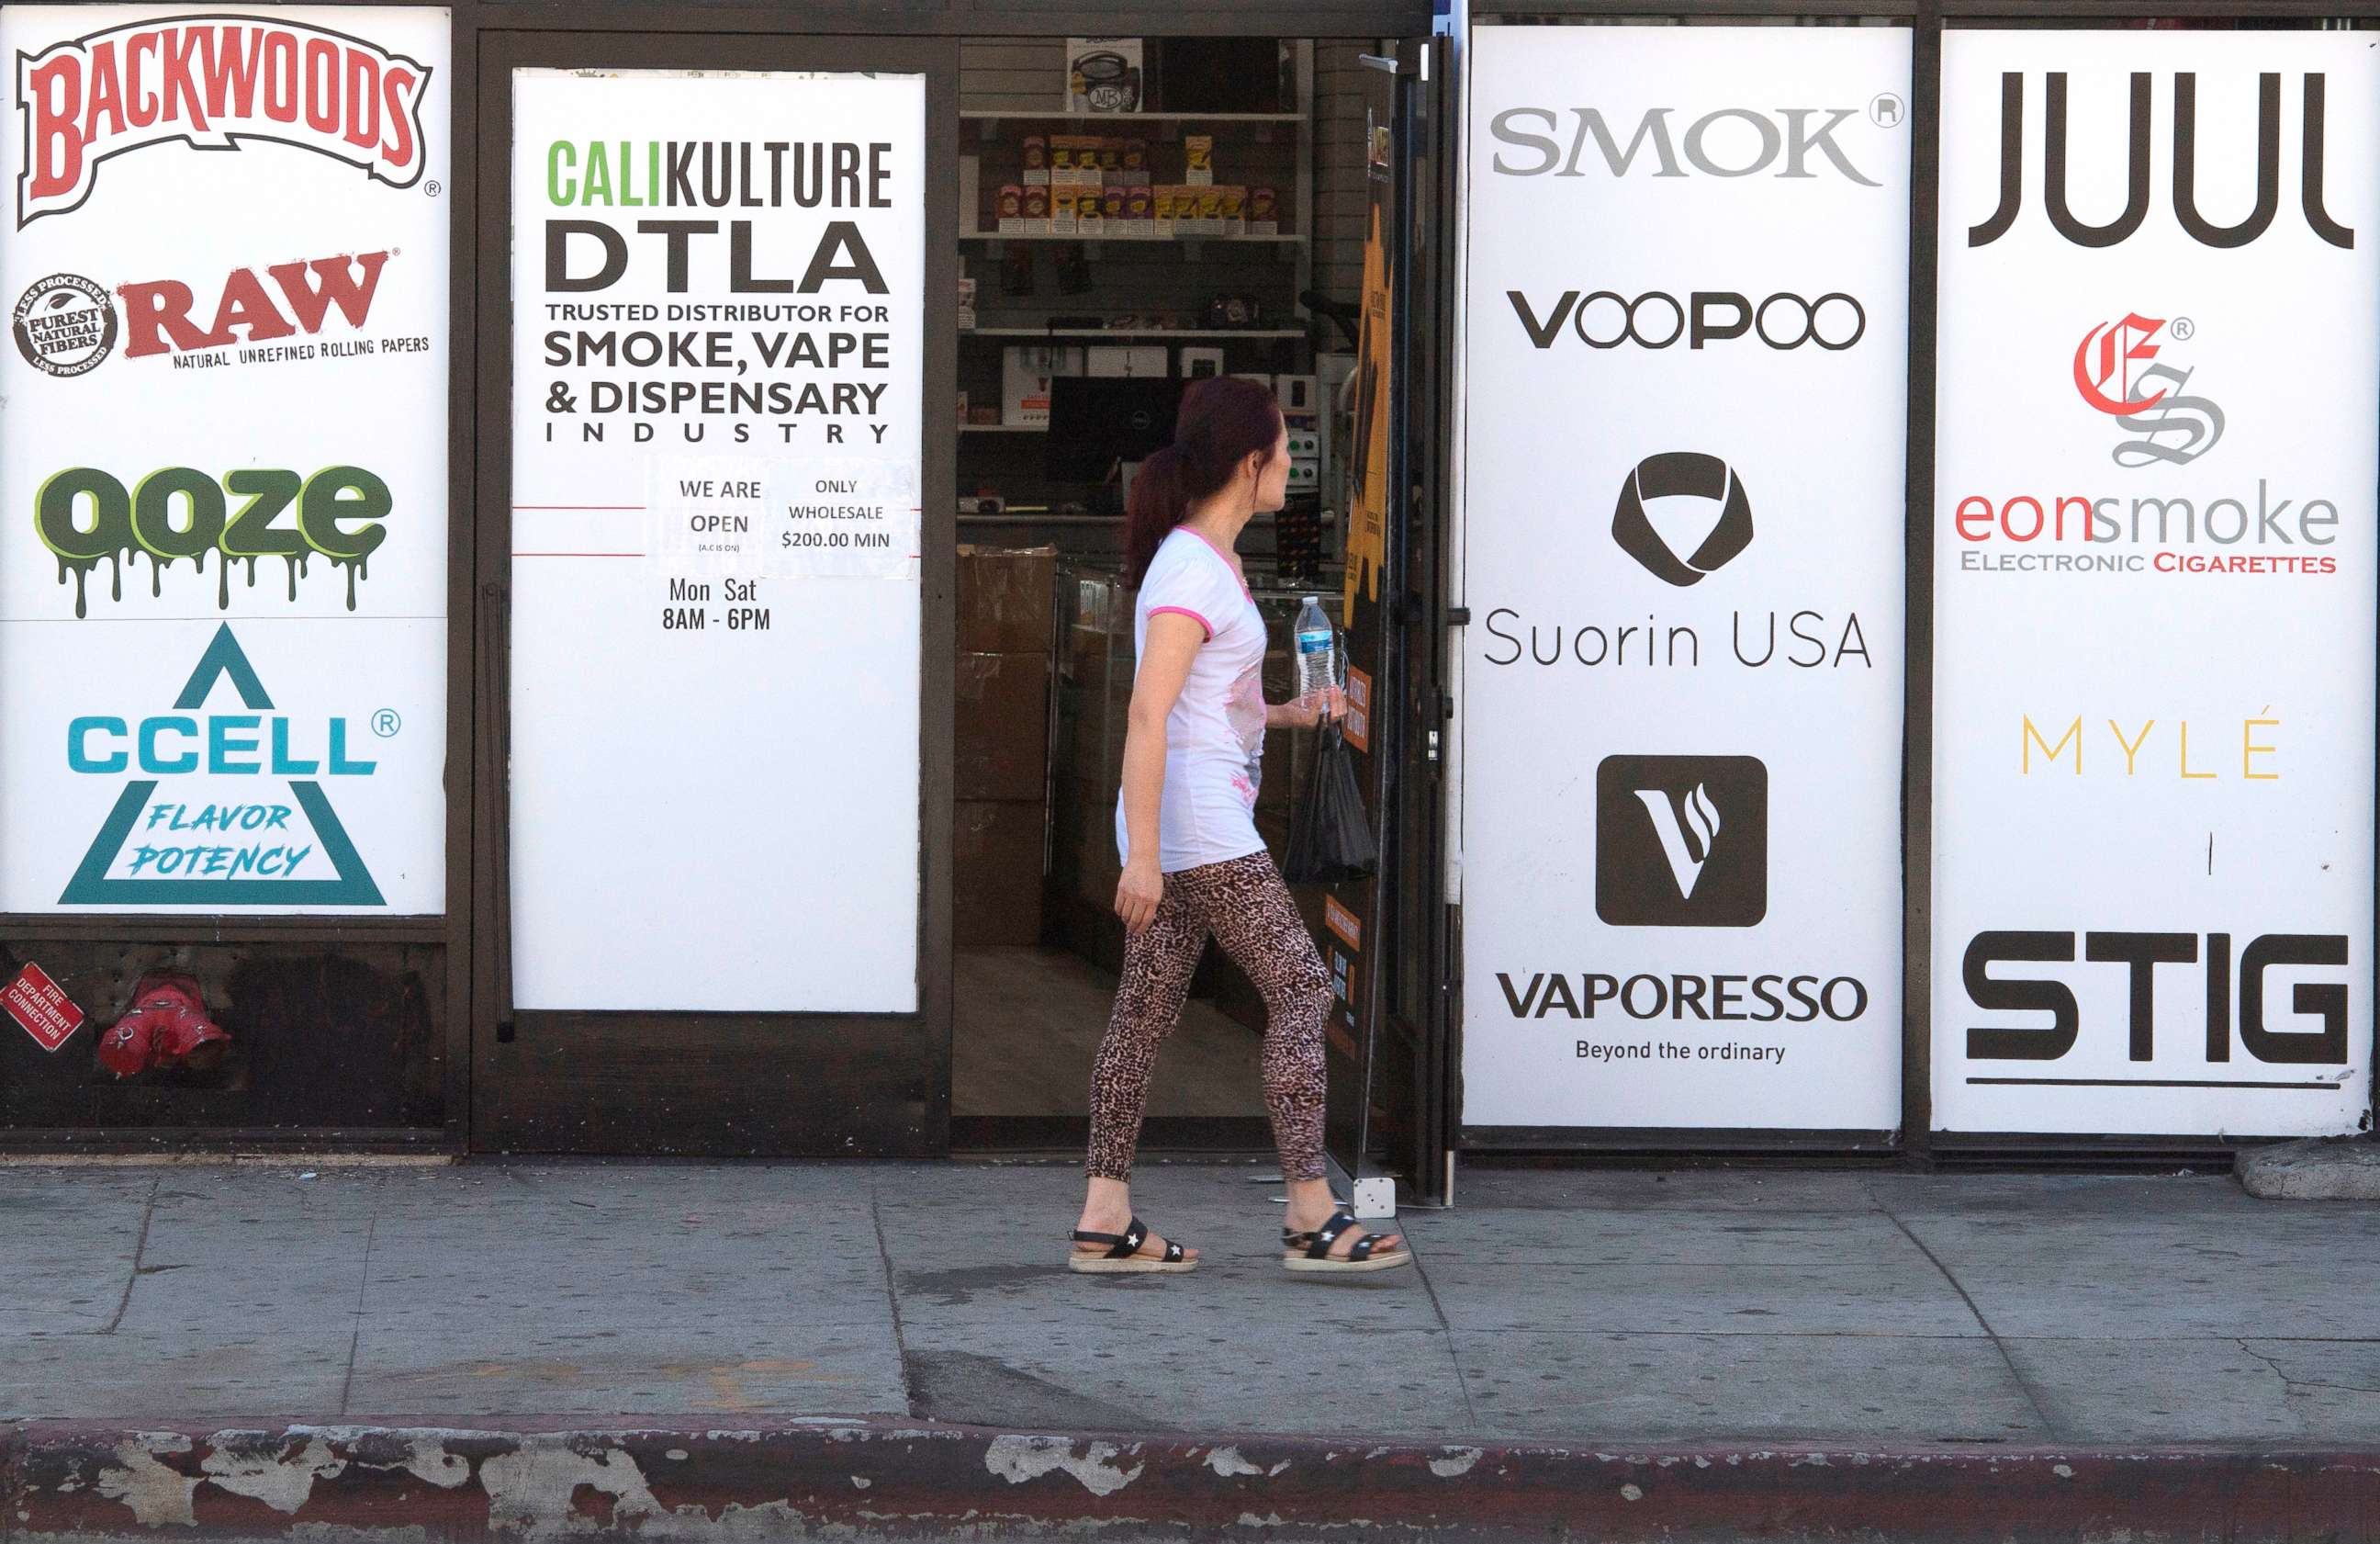 PHOTO: A vaping store is seen before the Los Angeles County Department of Public Health press conference to announce an investigation into deaths associated with the use of e-cigarettes, also known as vaping, in Los Angeles on September 6, 2019.